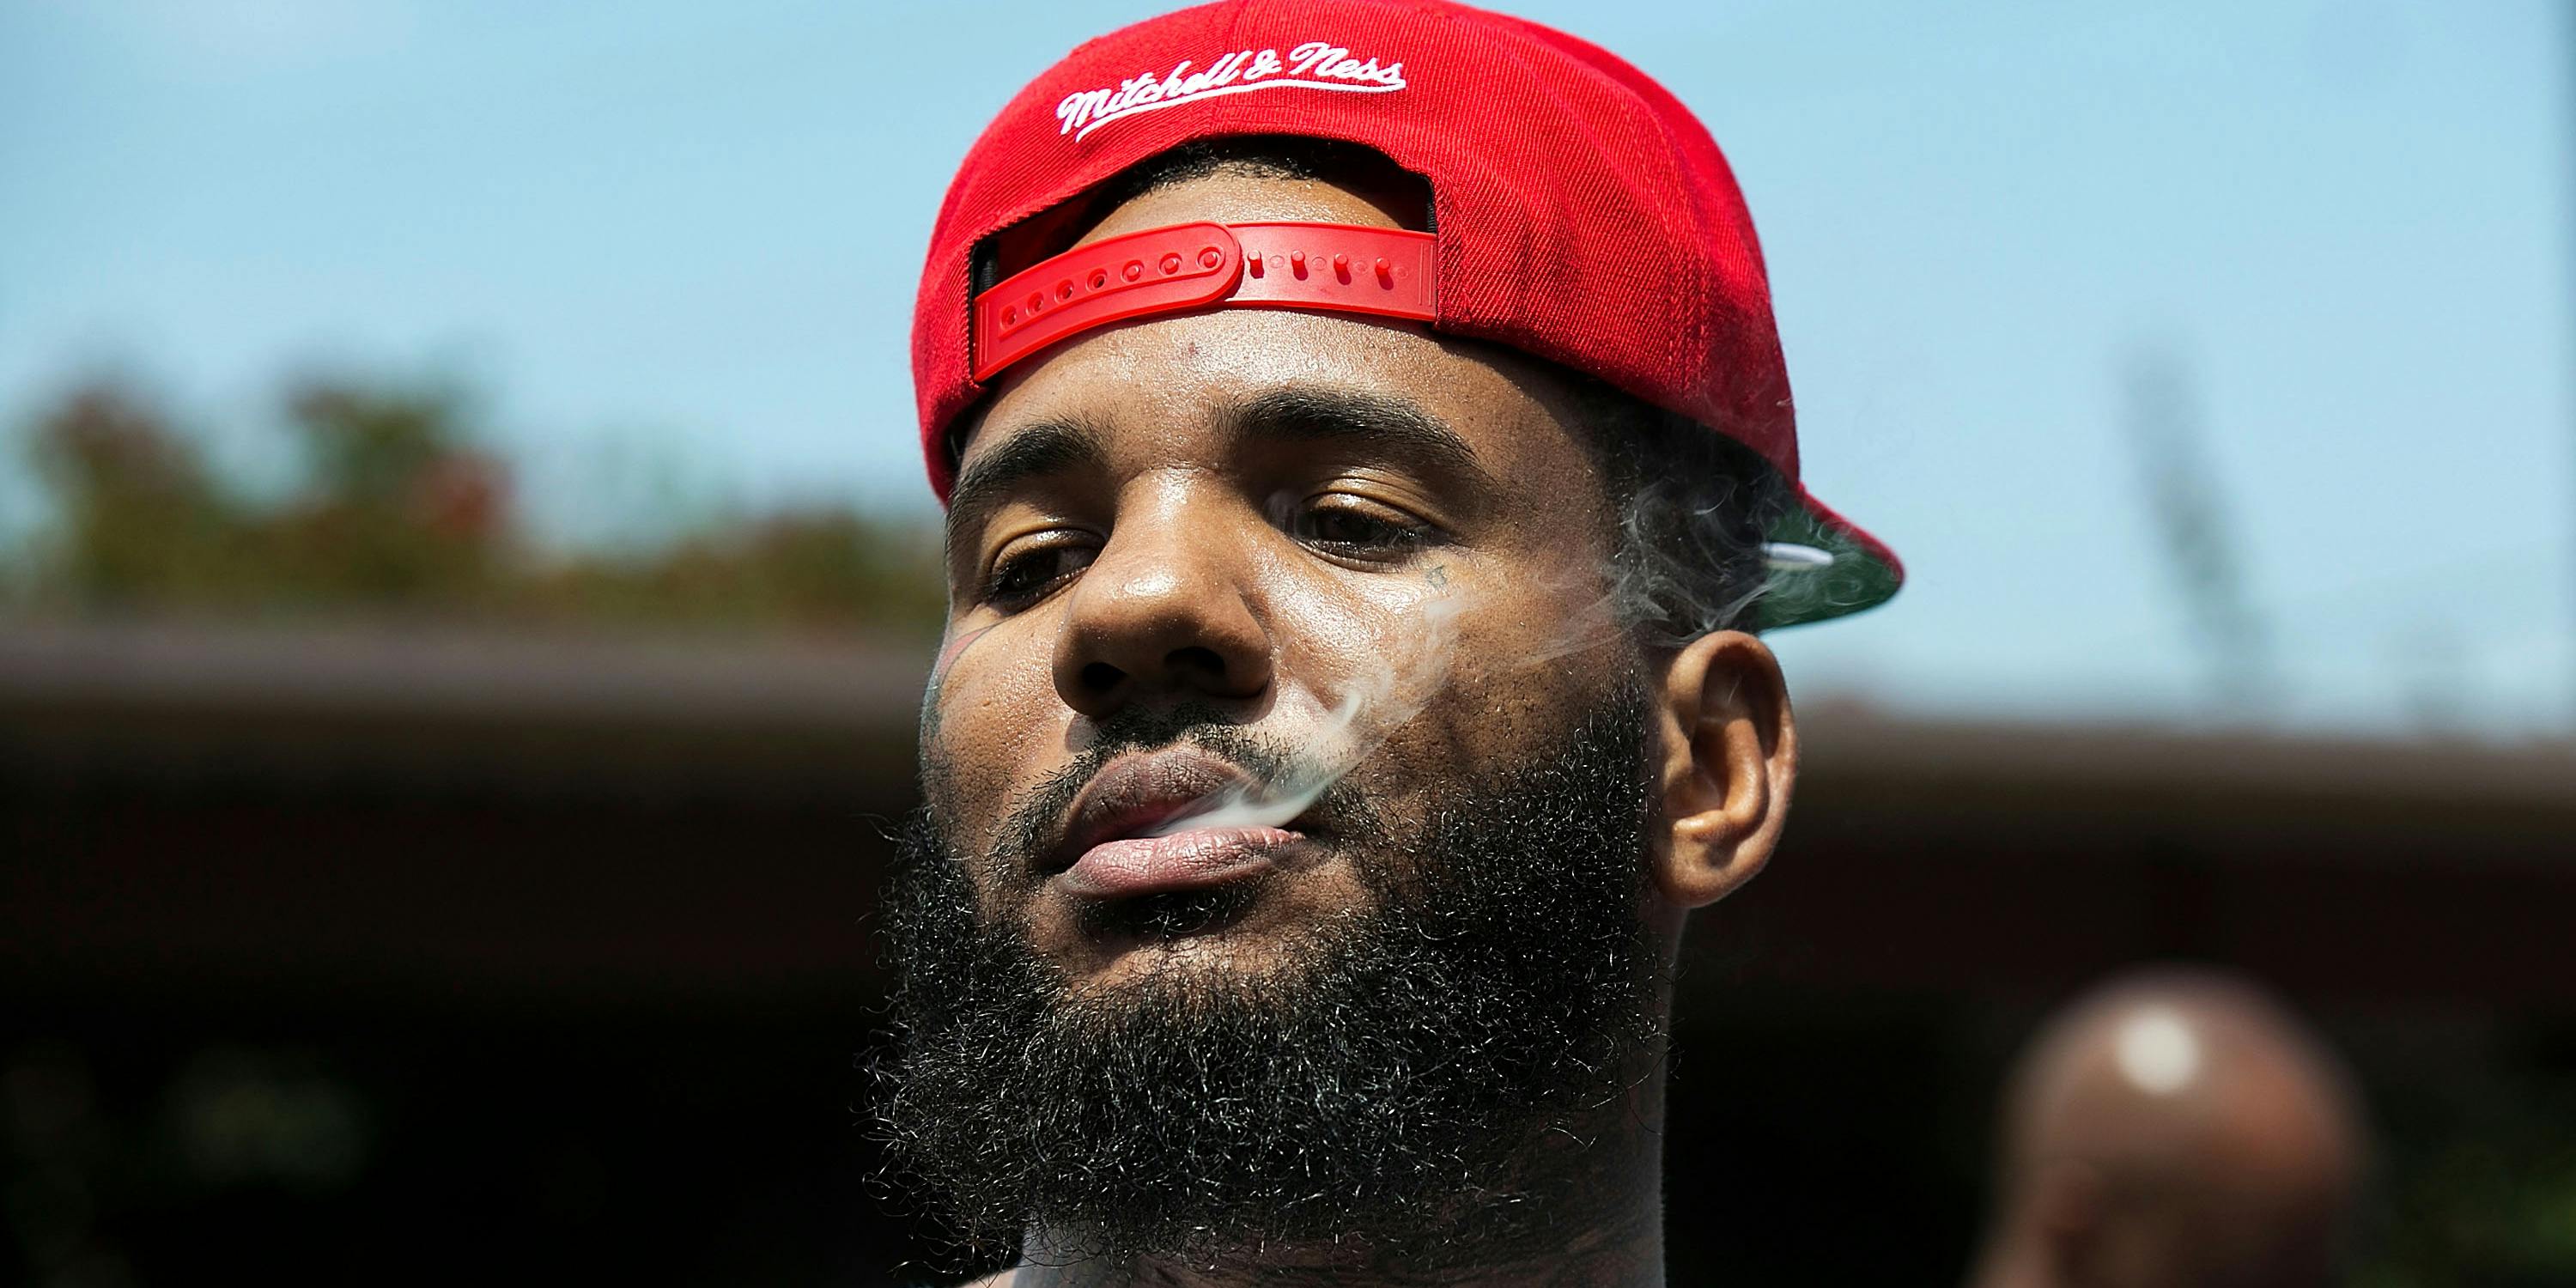 The Game, recently sued over his involvement with a cannabis cryptocurrency company, pictured at a 2016 music video shoot.